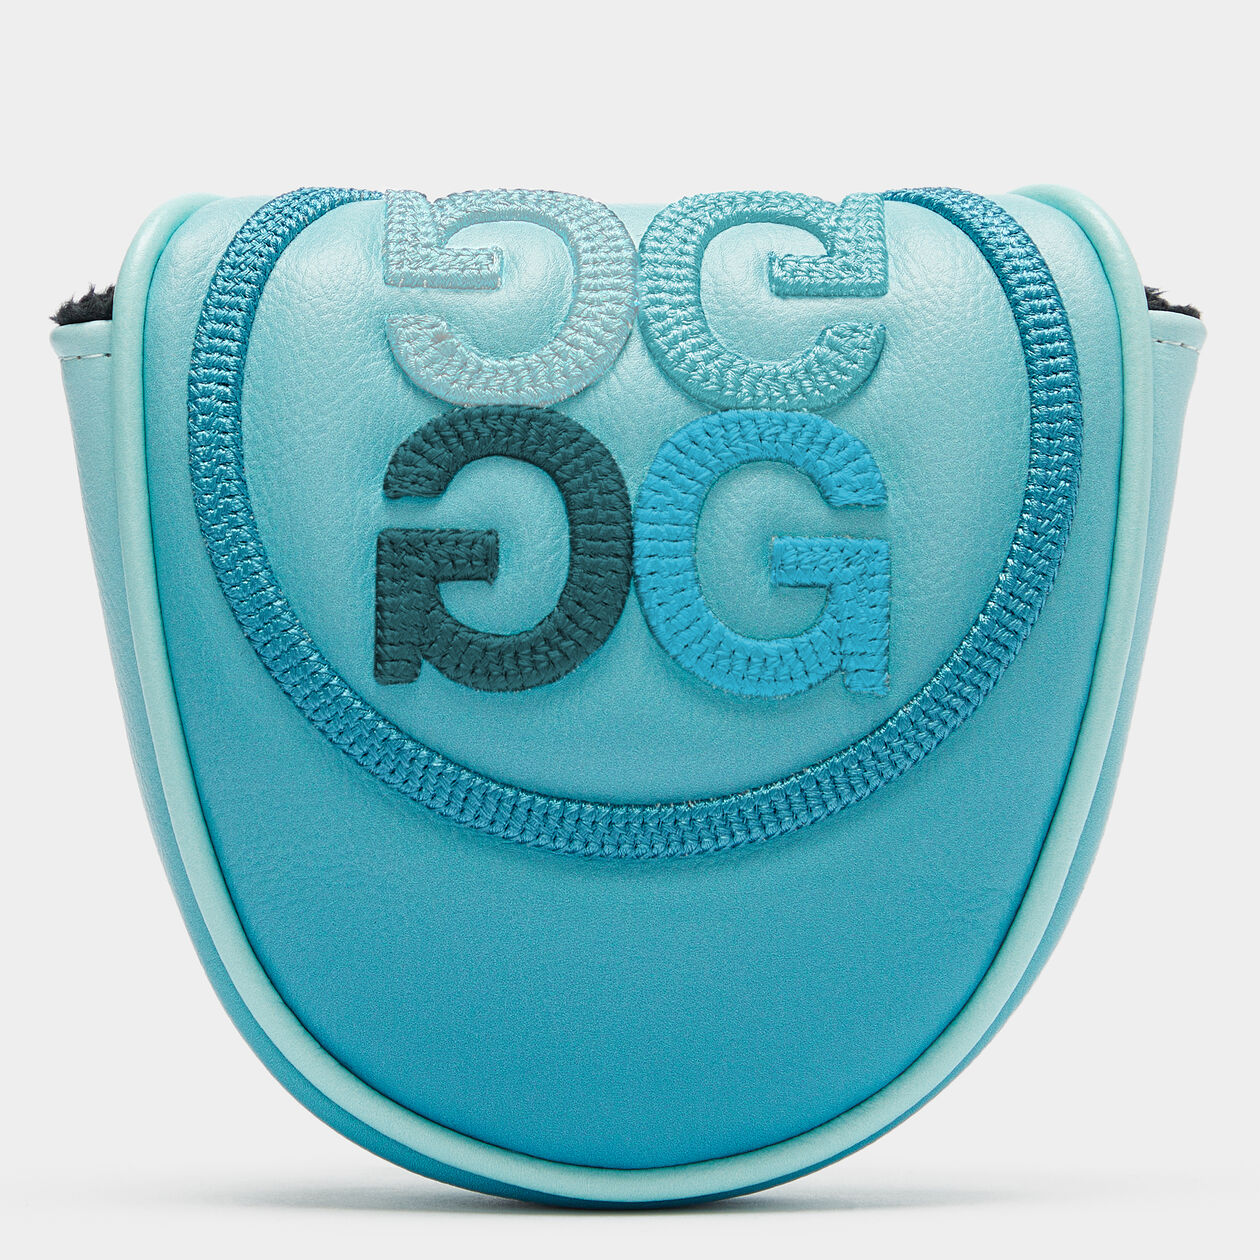 GRADIENT CIRCLE G'S OMBRÉ MALLET PUTTER COVER 高爾夫球桿套